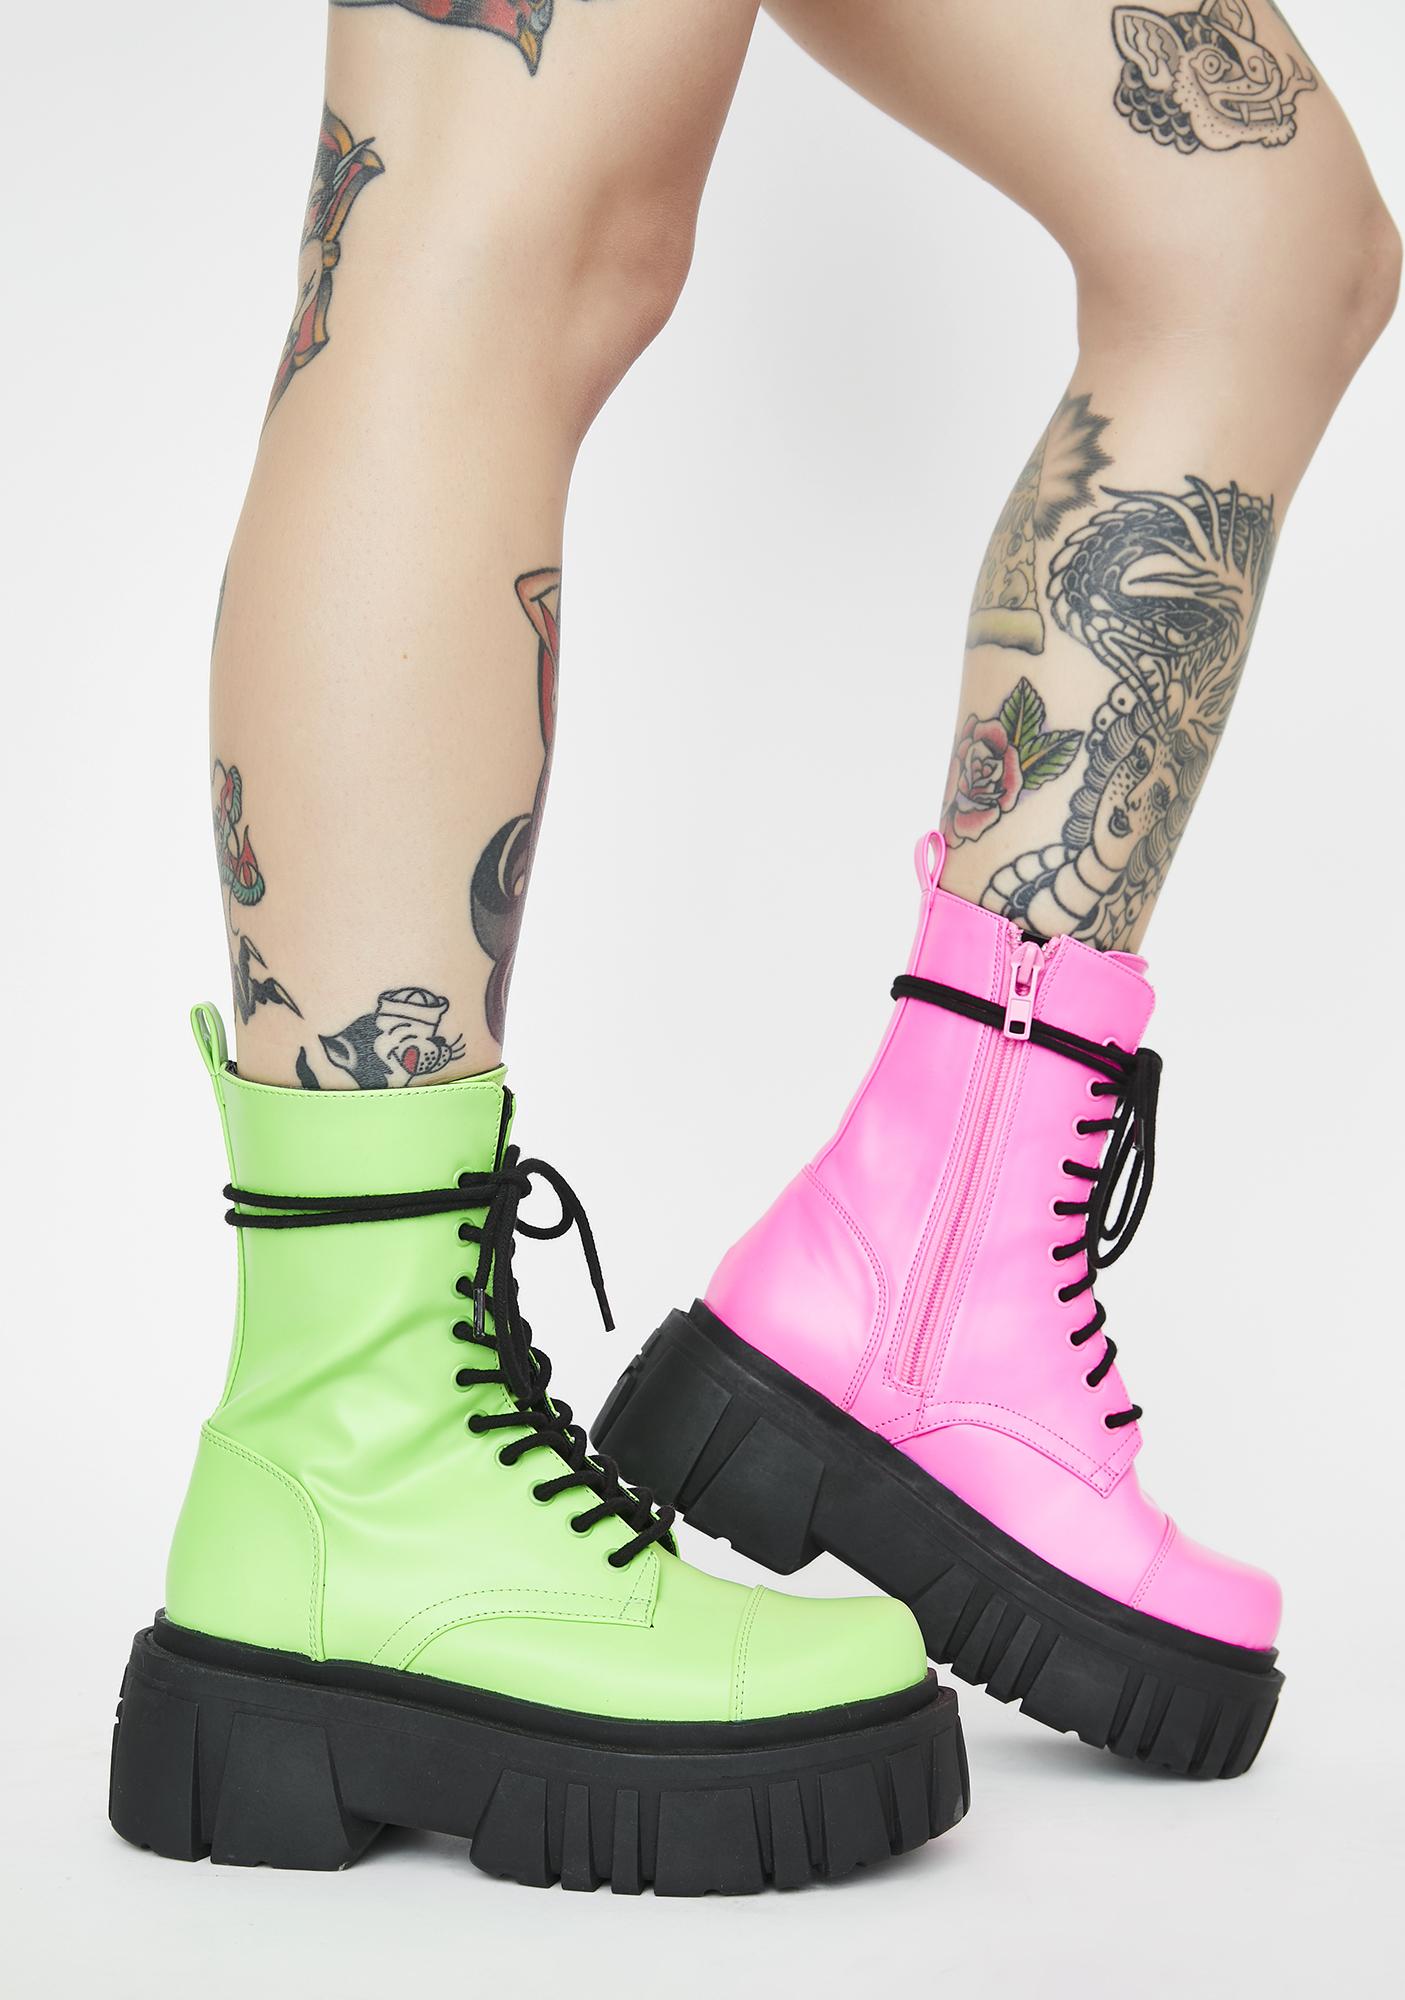 Club Exx Mismatched Combat Boots Neon Pink Neon Green